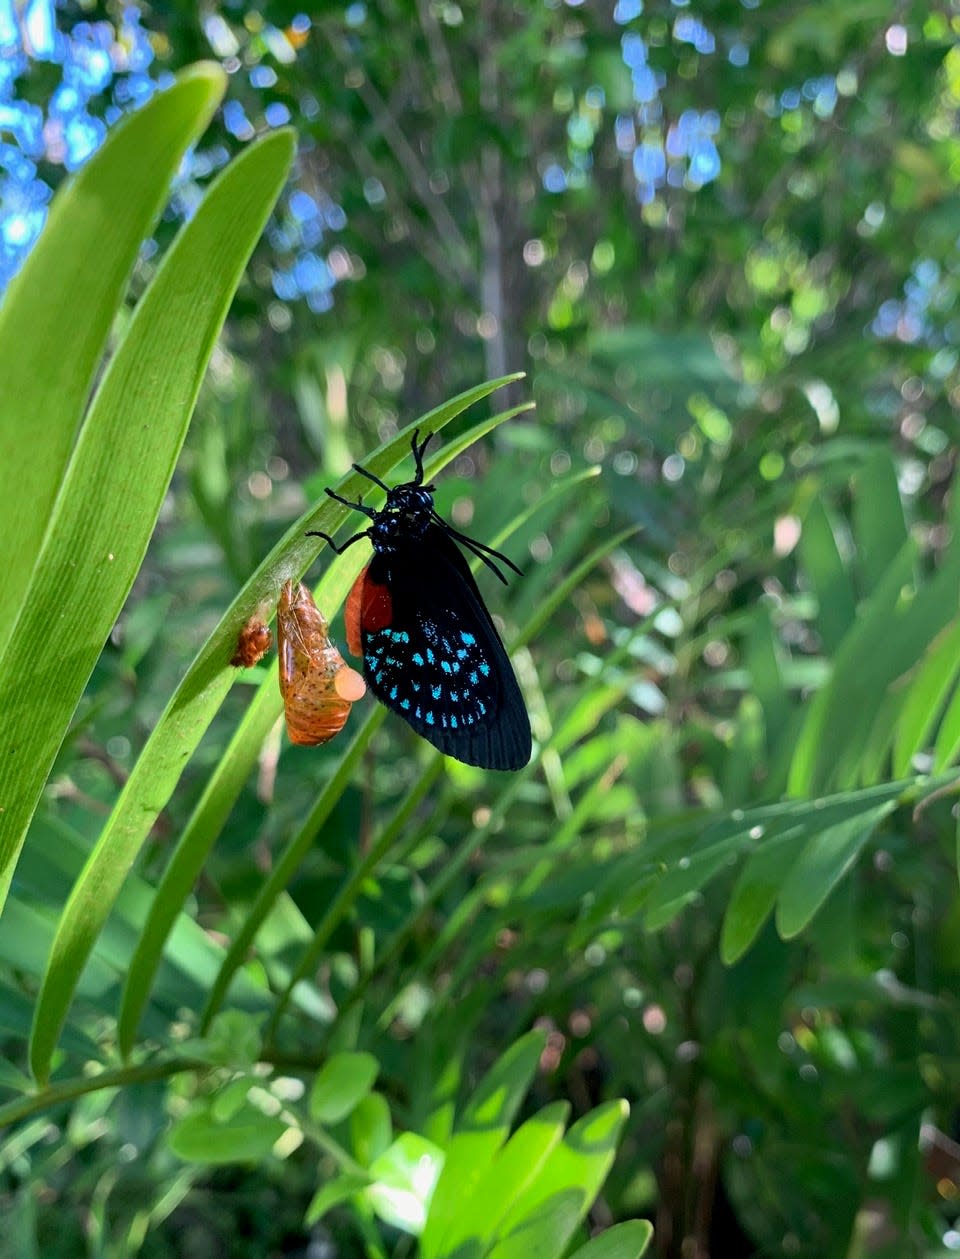 An atala butterfly emerges from its chrysalis.